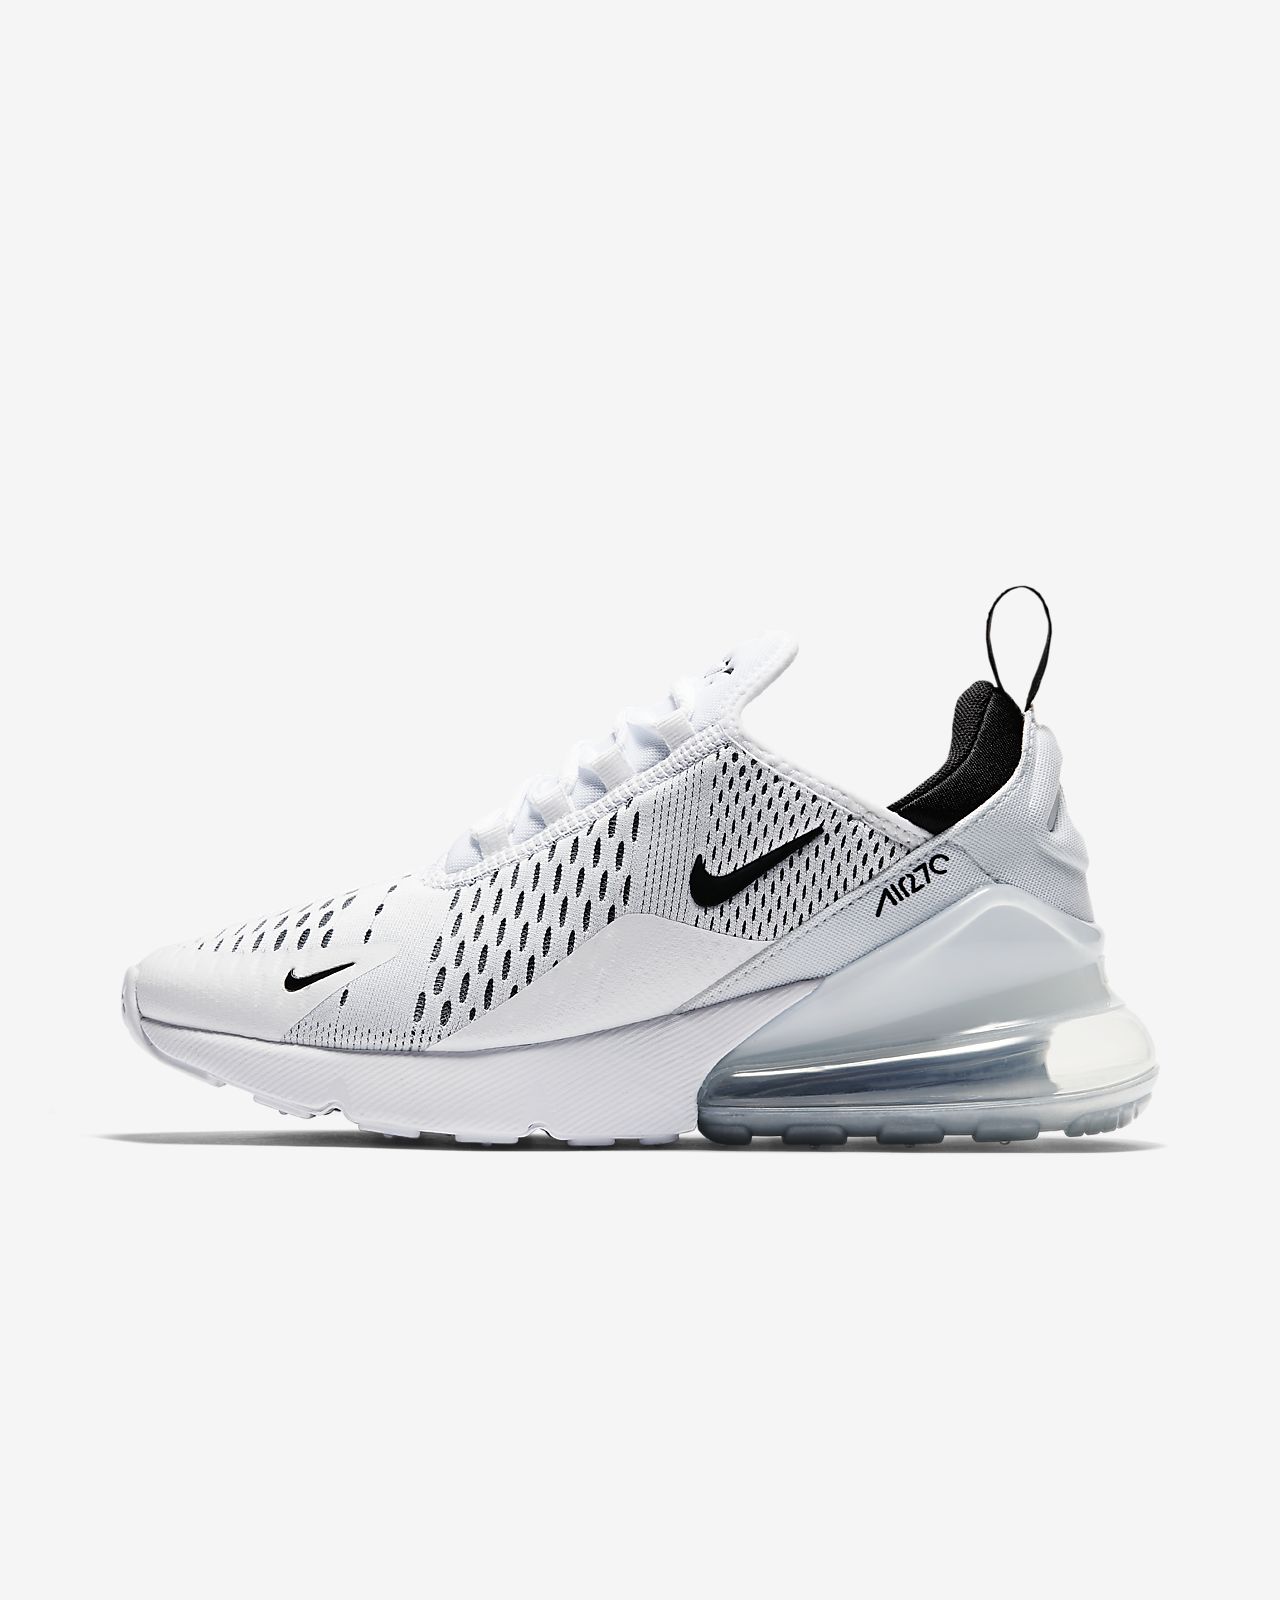 nike cr 270 Stock Up On Clearance 